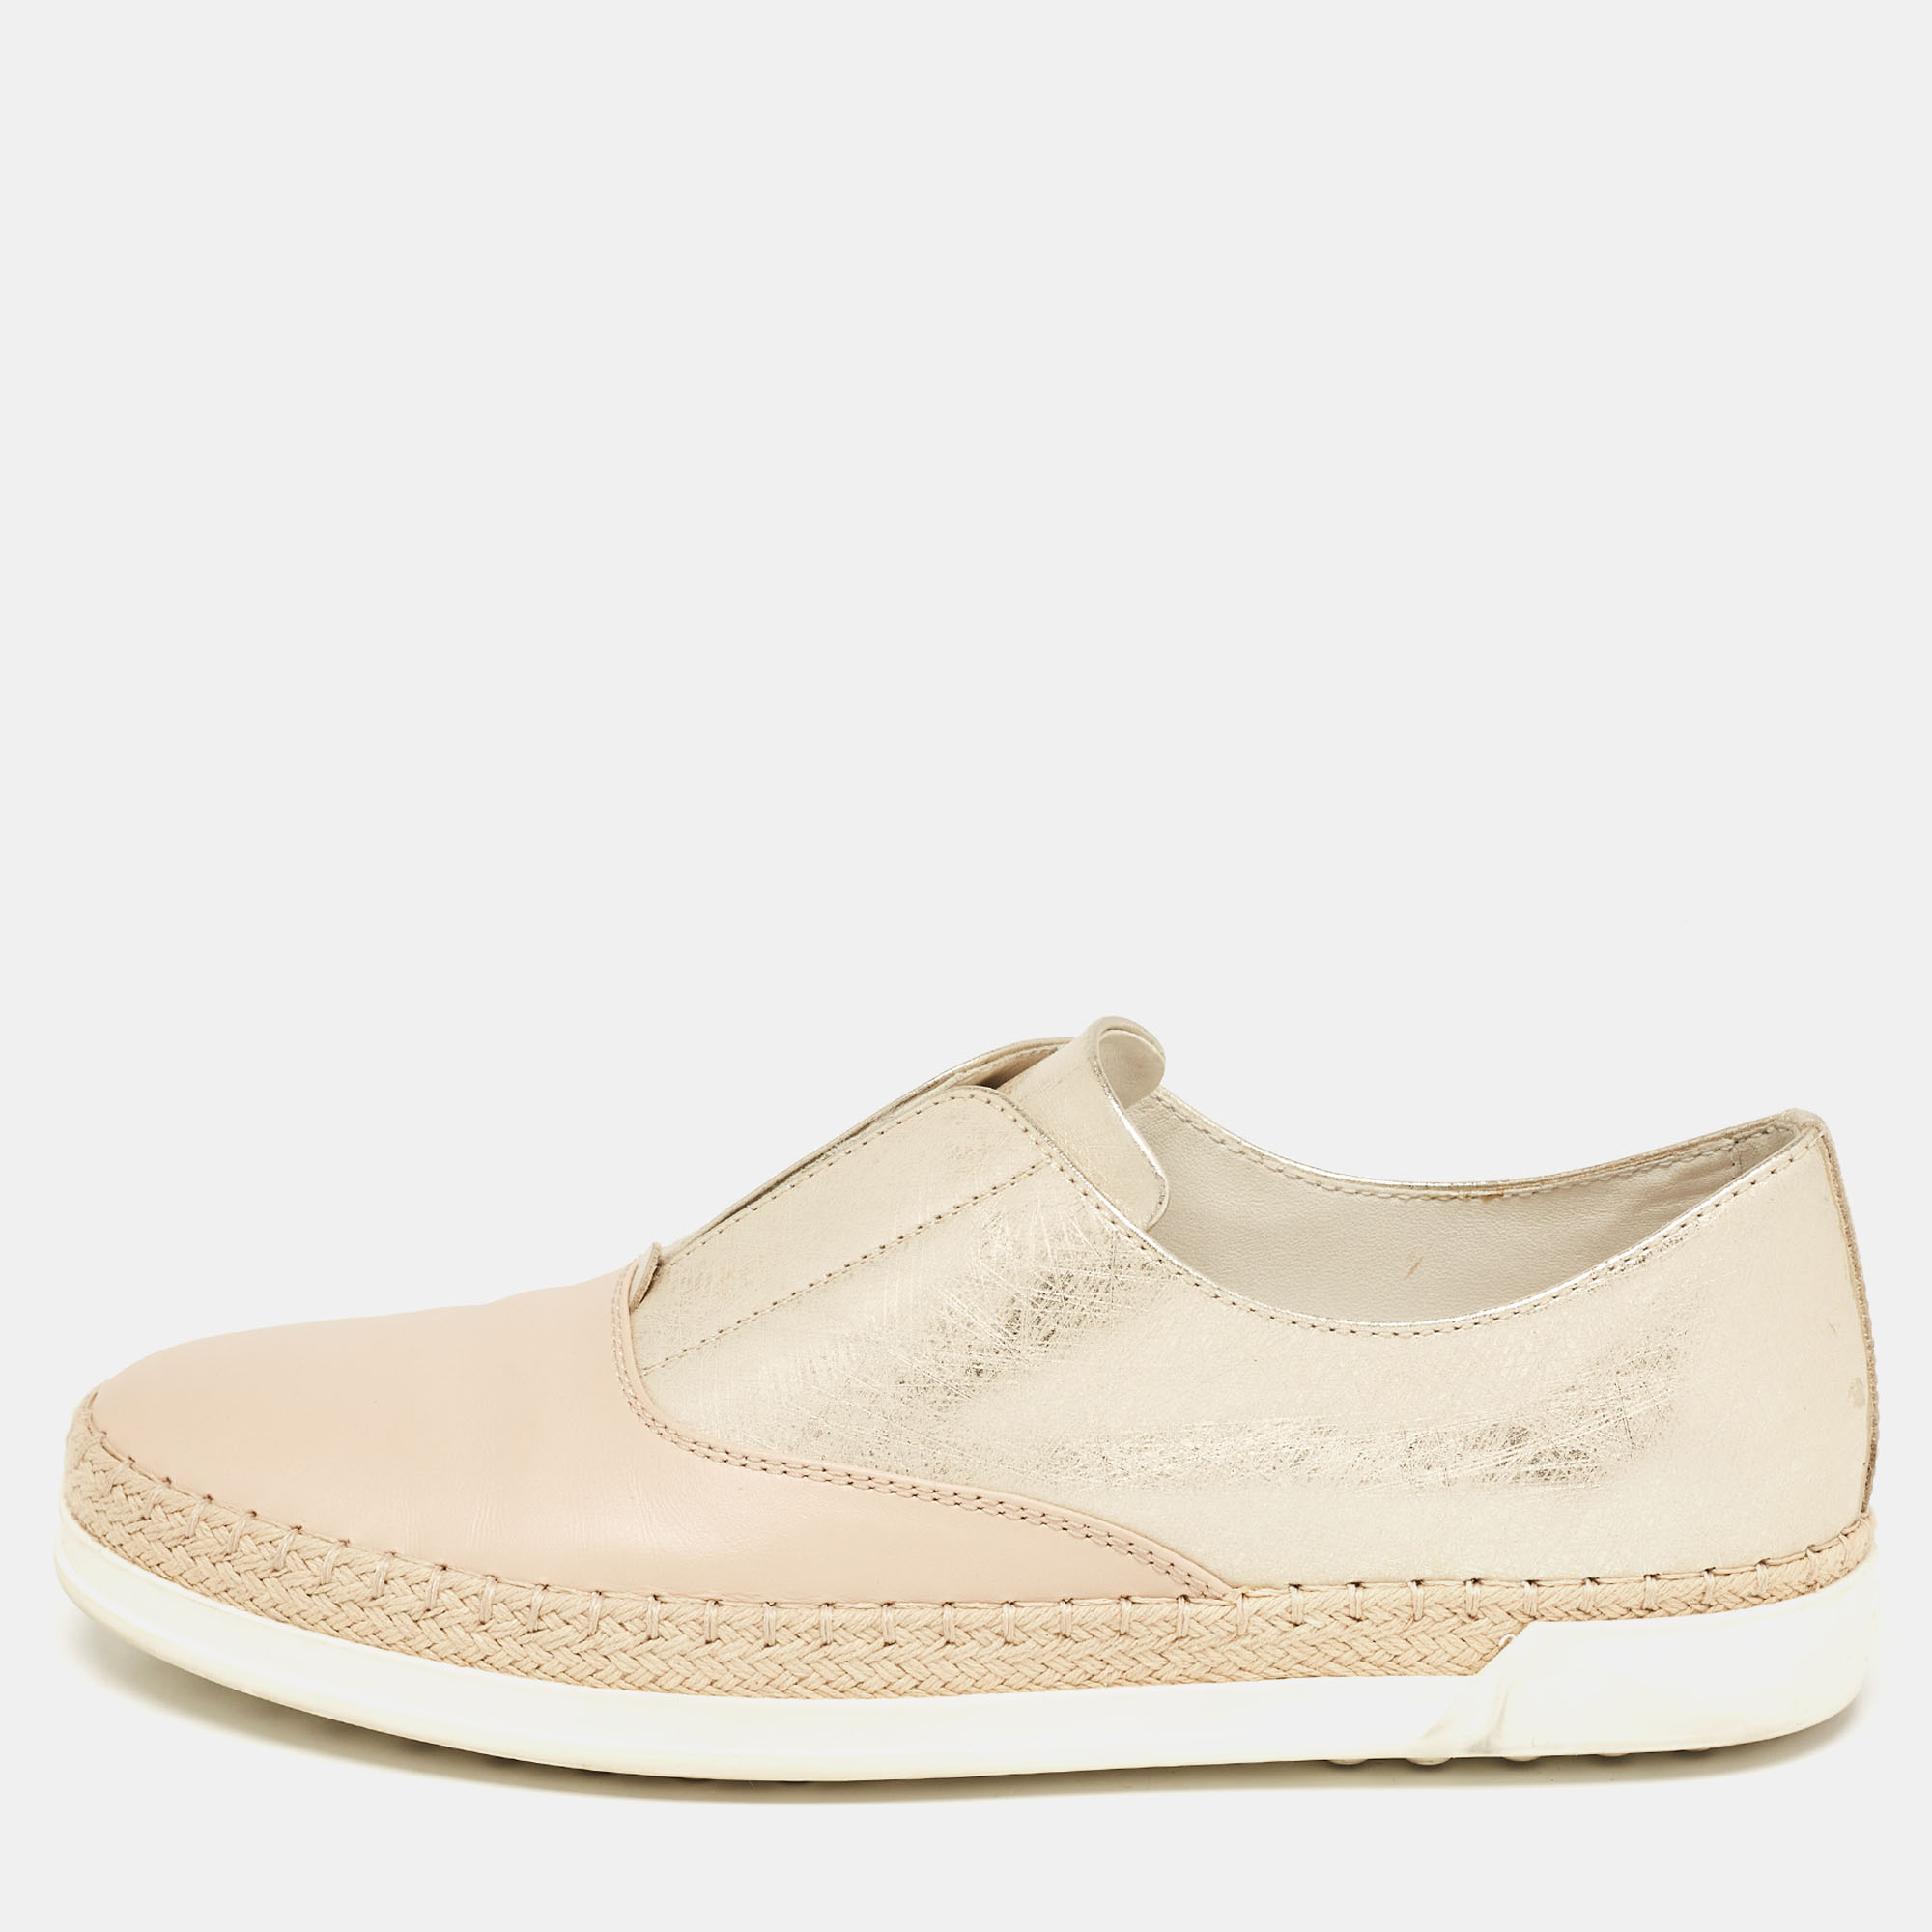 Tod's beige/gold leather espadrille flat size 36